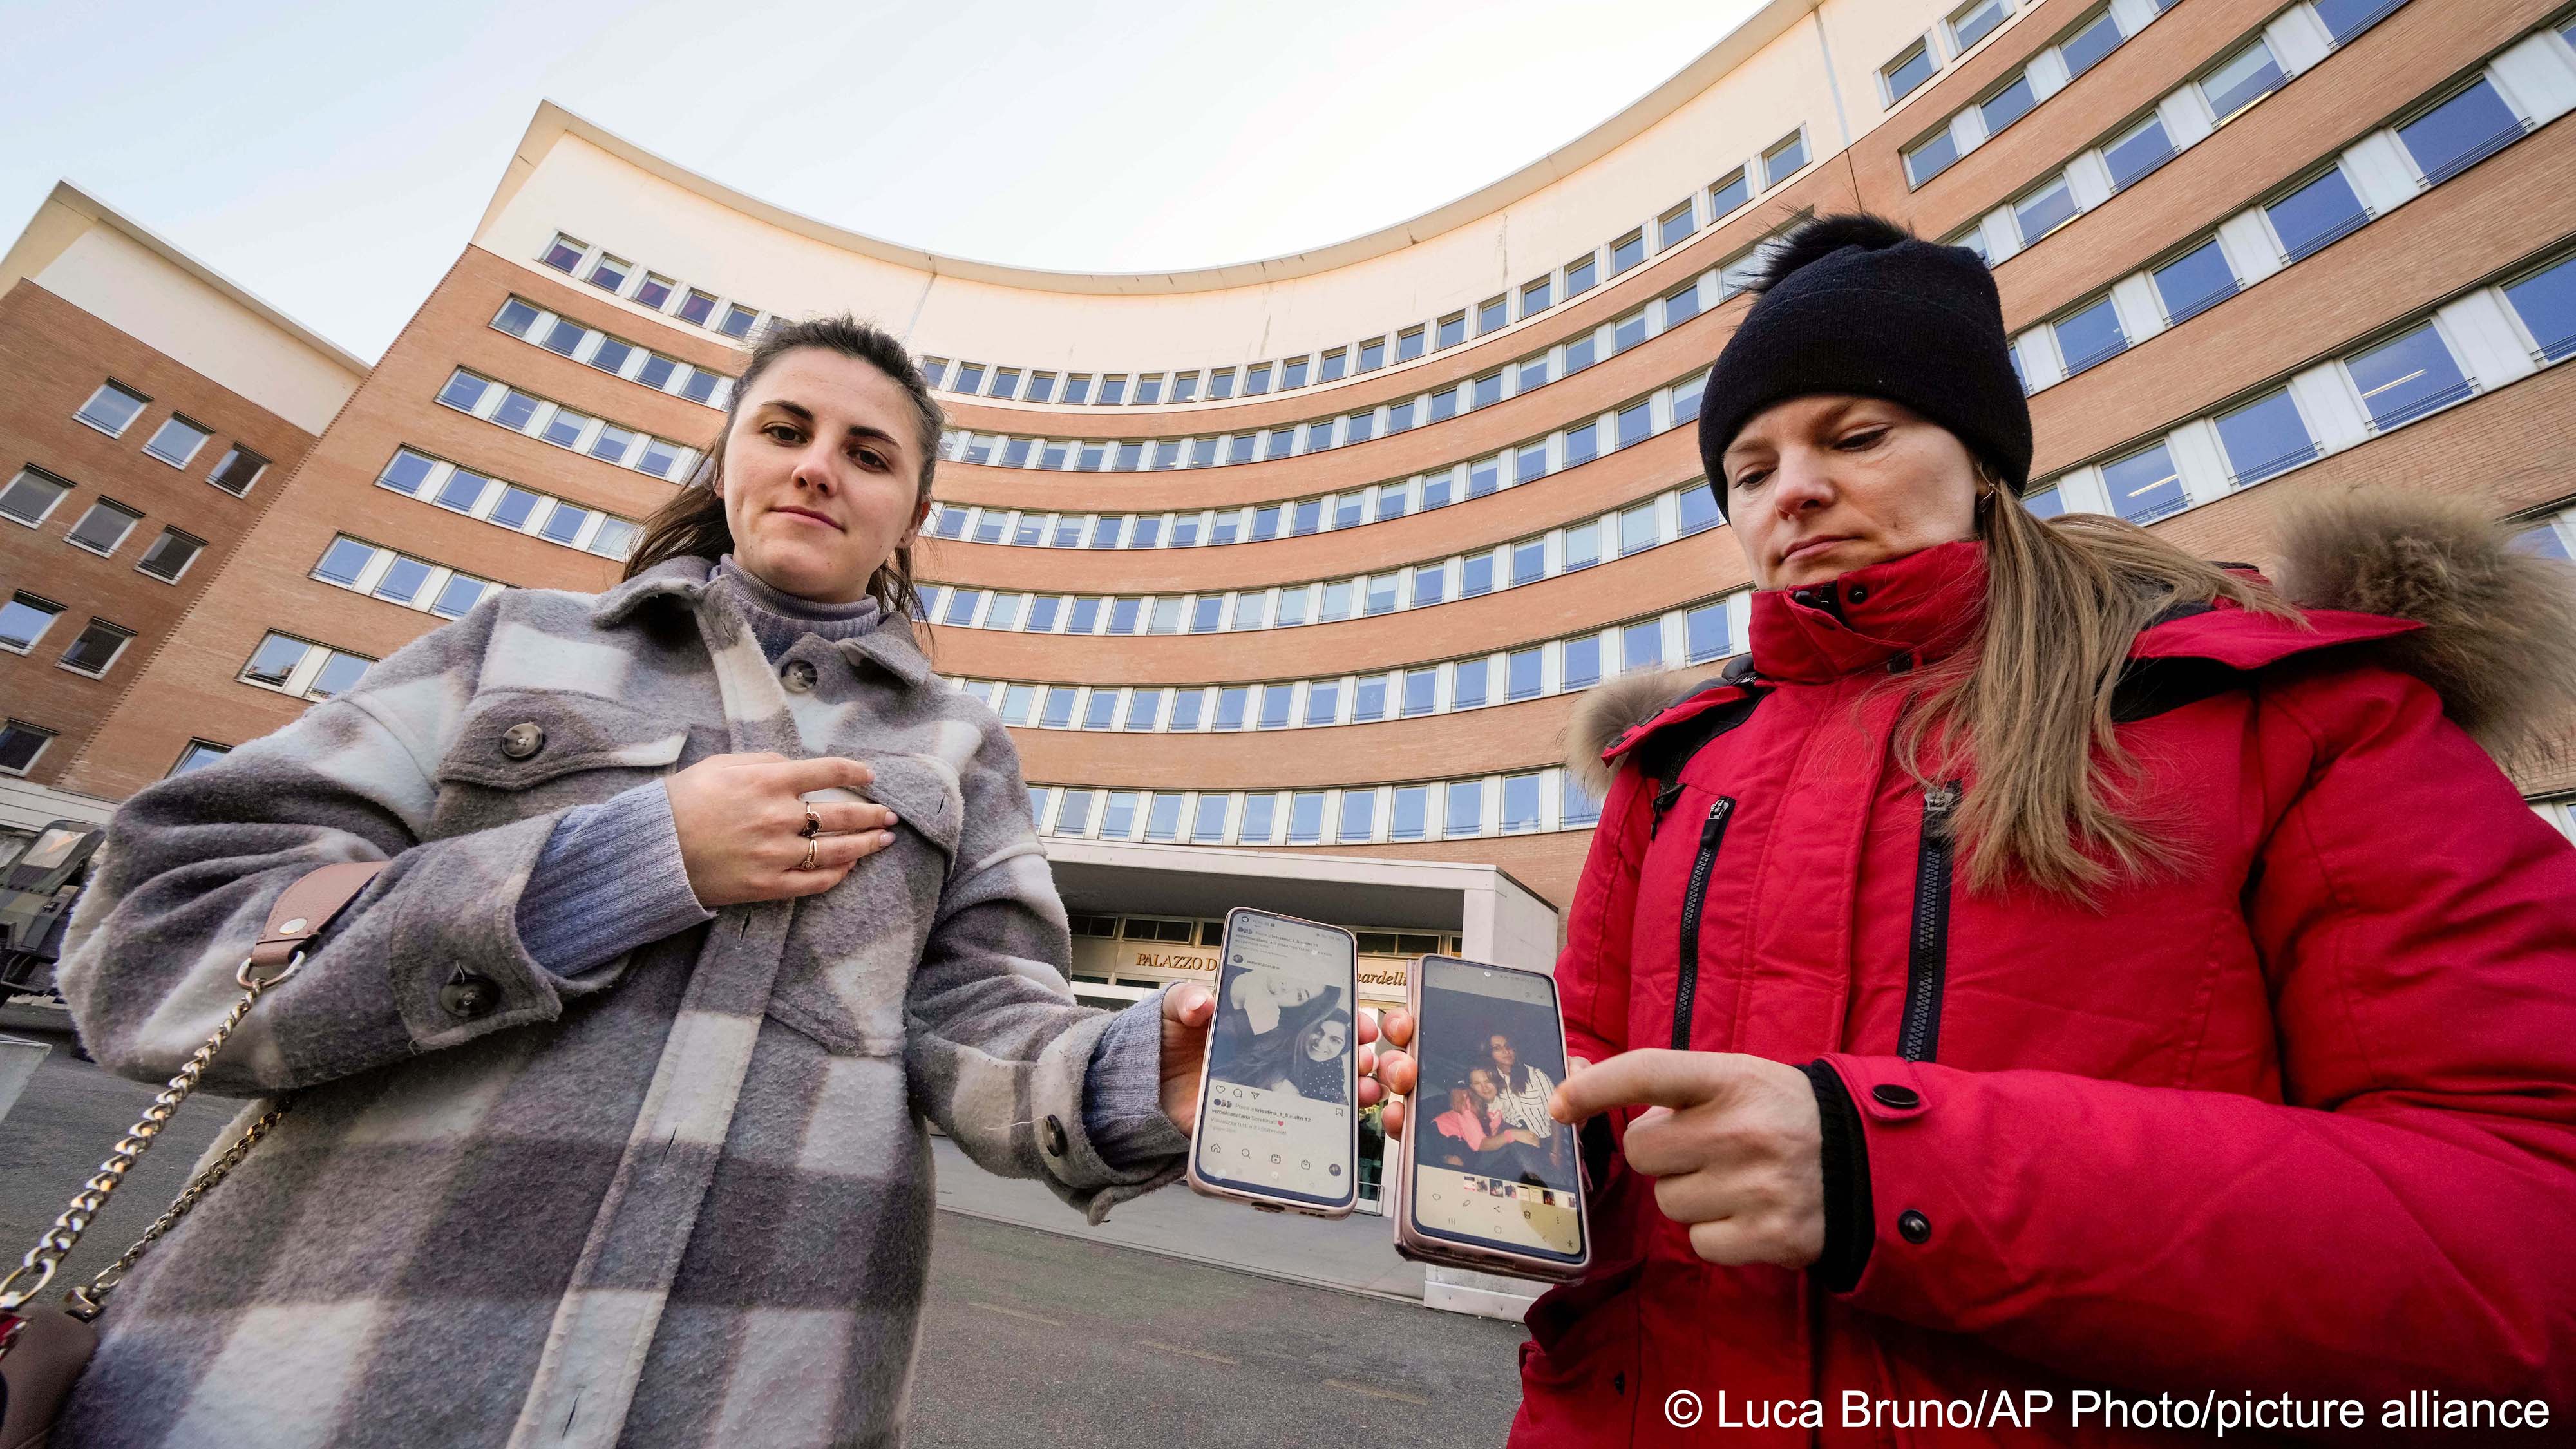 erkalets Olha from Ukraine, right, and Veronica Catana of Moldova, show their smartphones with pictures of their Pakistani-born friend Sana Cheema before testifying in a trial about her alleged murder outside the courthouse in Brescia, northern Italy, 9 February 2023 (image: Luca Bruno/AP Photo/picture alliance) 